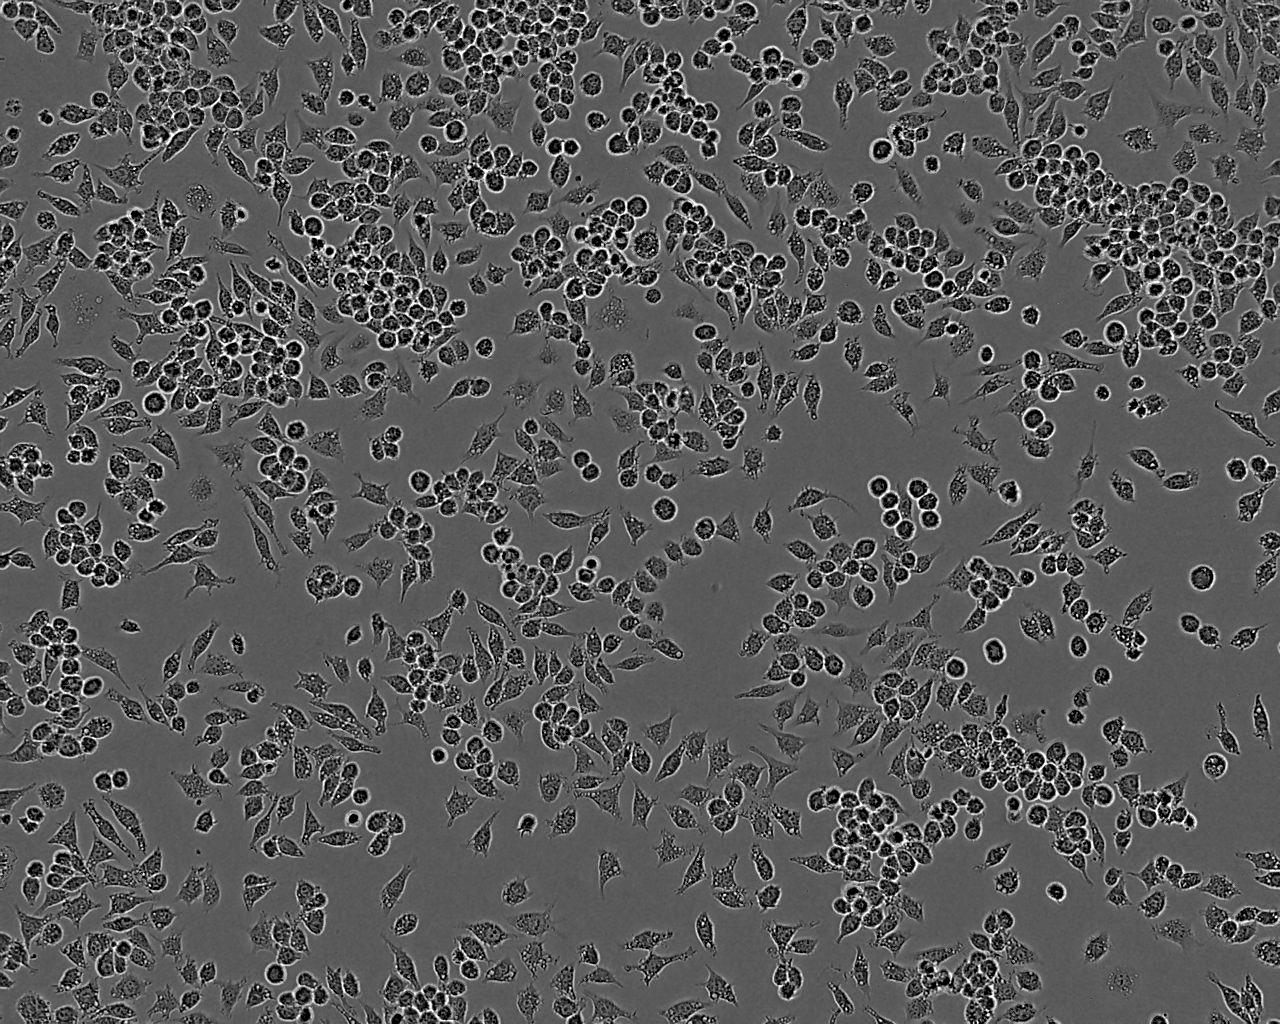 HPDE6c7 Epithelial Cell|人正常胰腺导管上皮传代细胞(有STR鉴定),HPDE6c7 Epithelial Cell